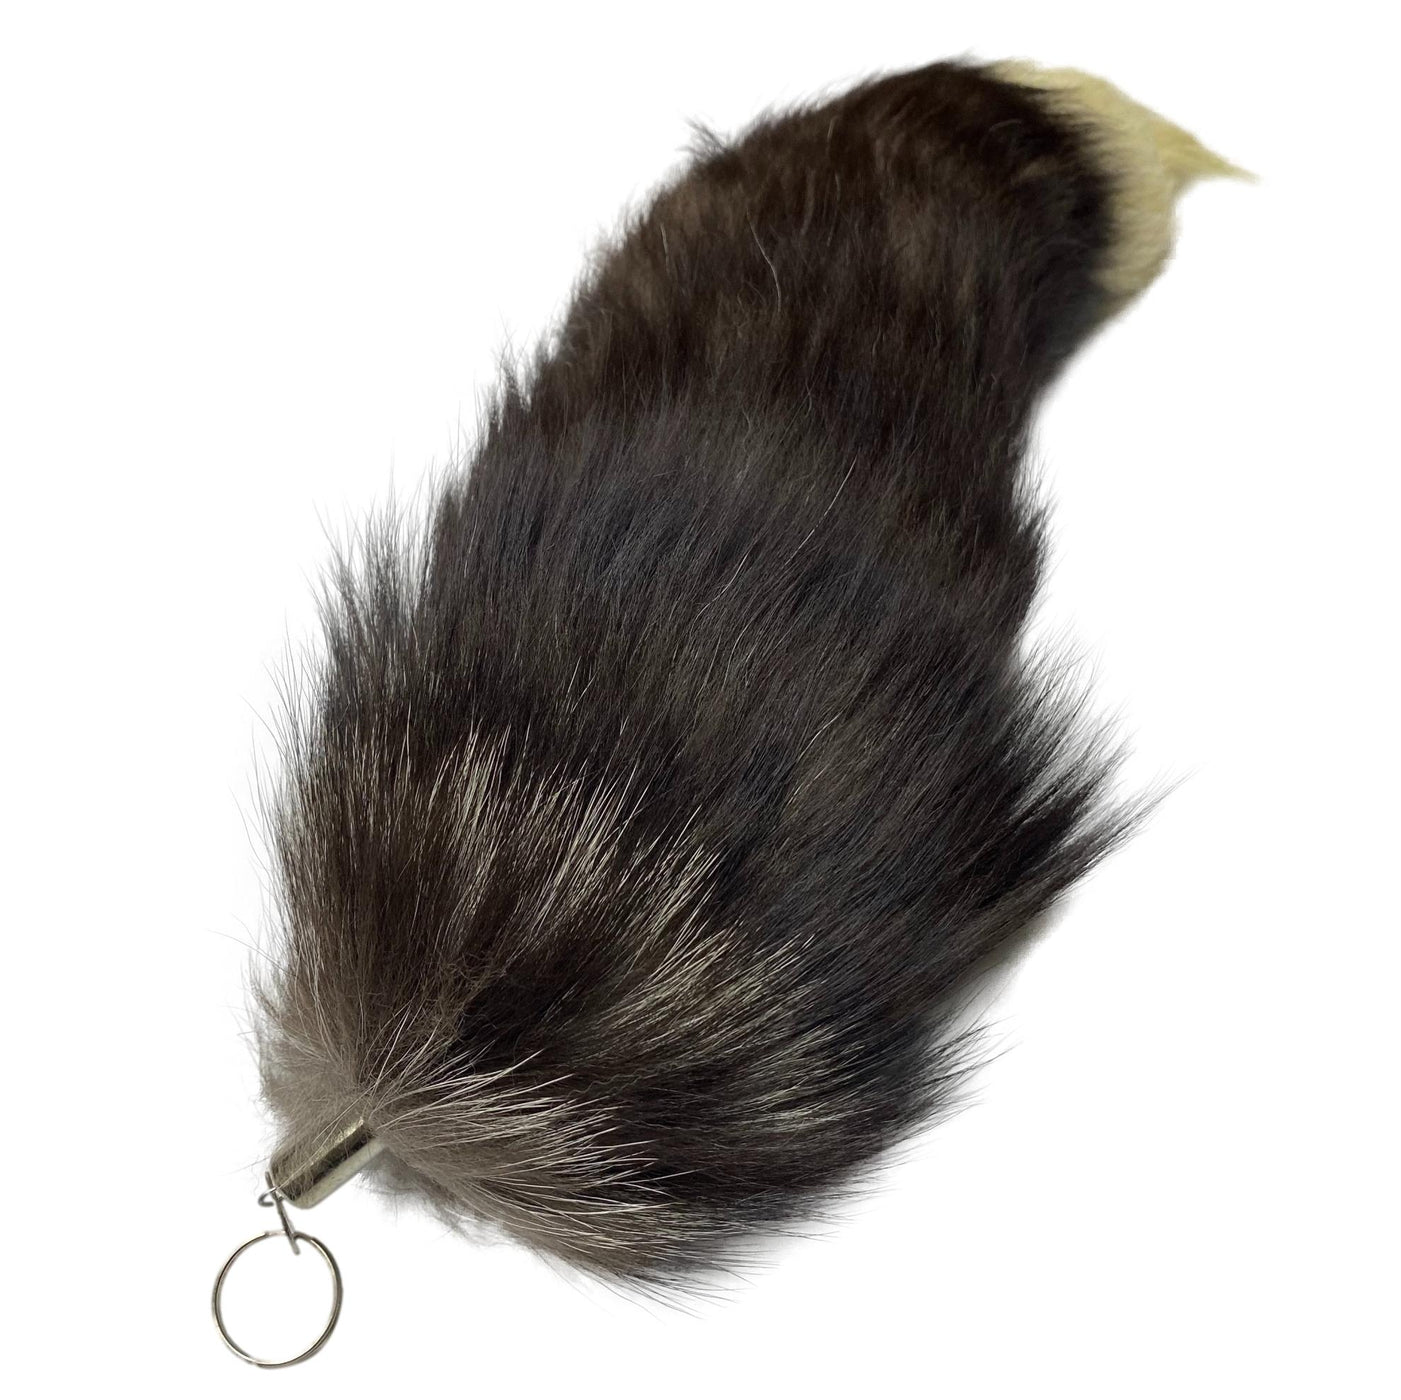 Authentic Large Silver Fox Tail - Genuine Fur Tail for Crafts and Cost ...